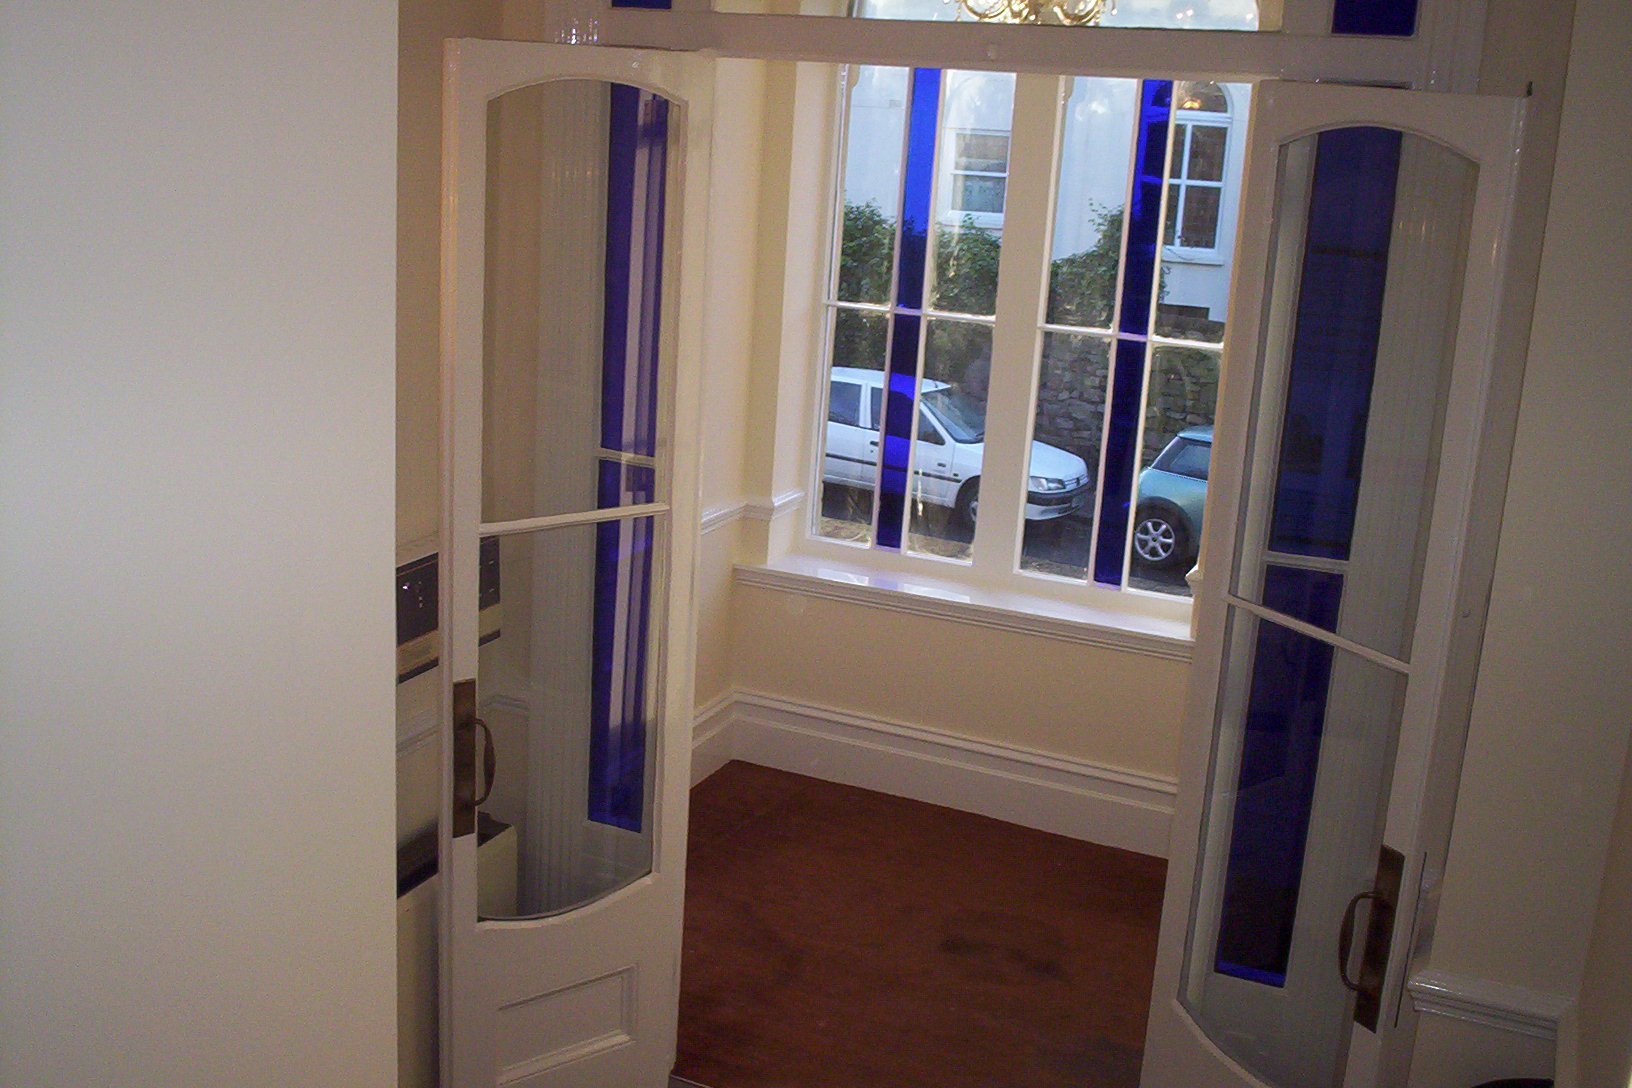 Conservatory doors after decorating